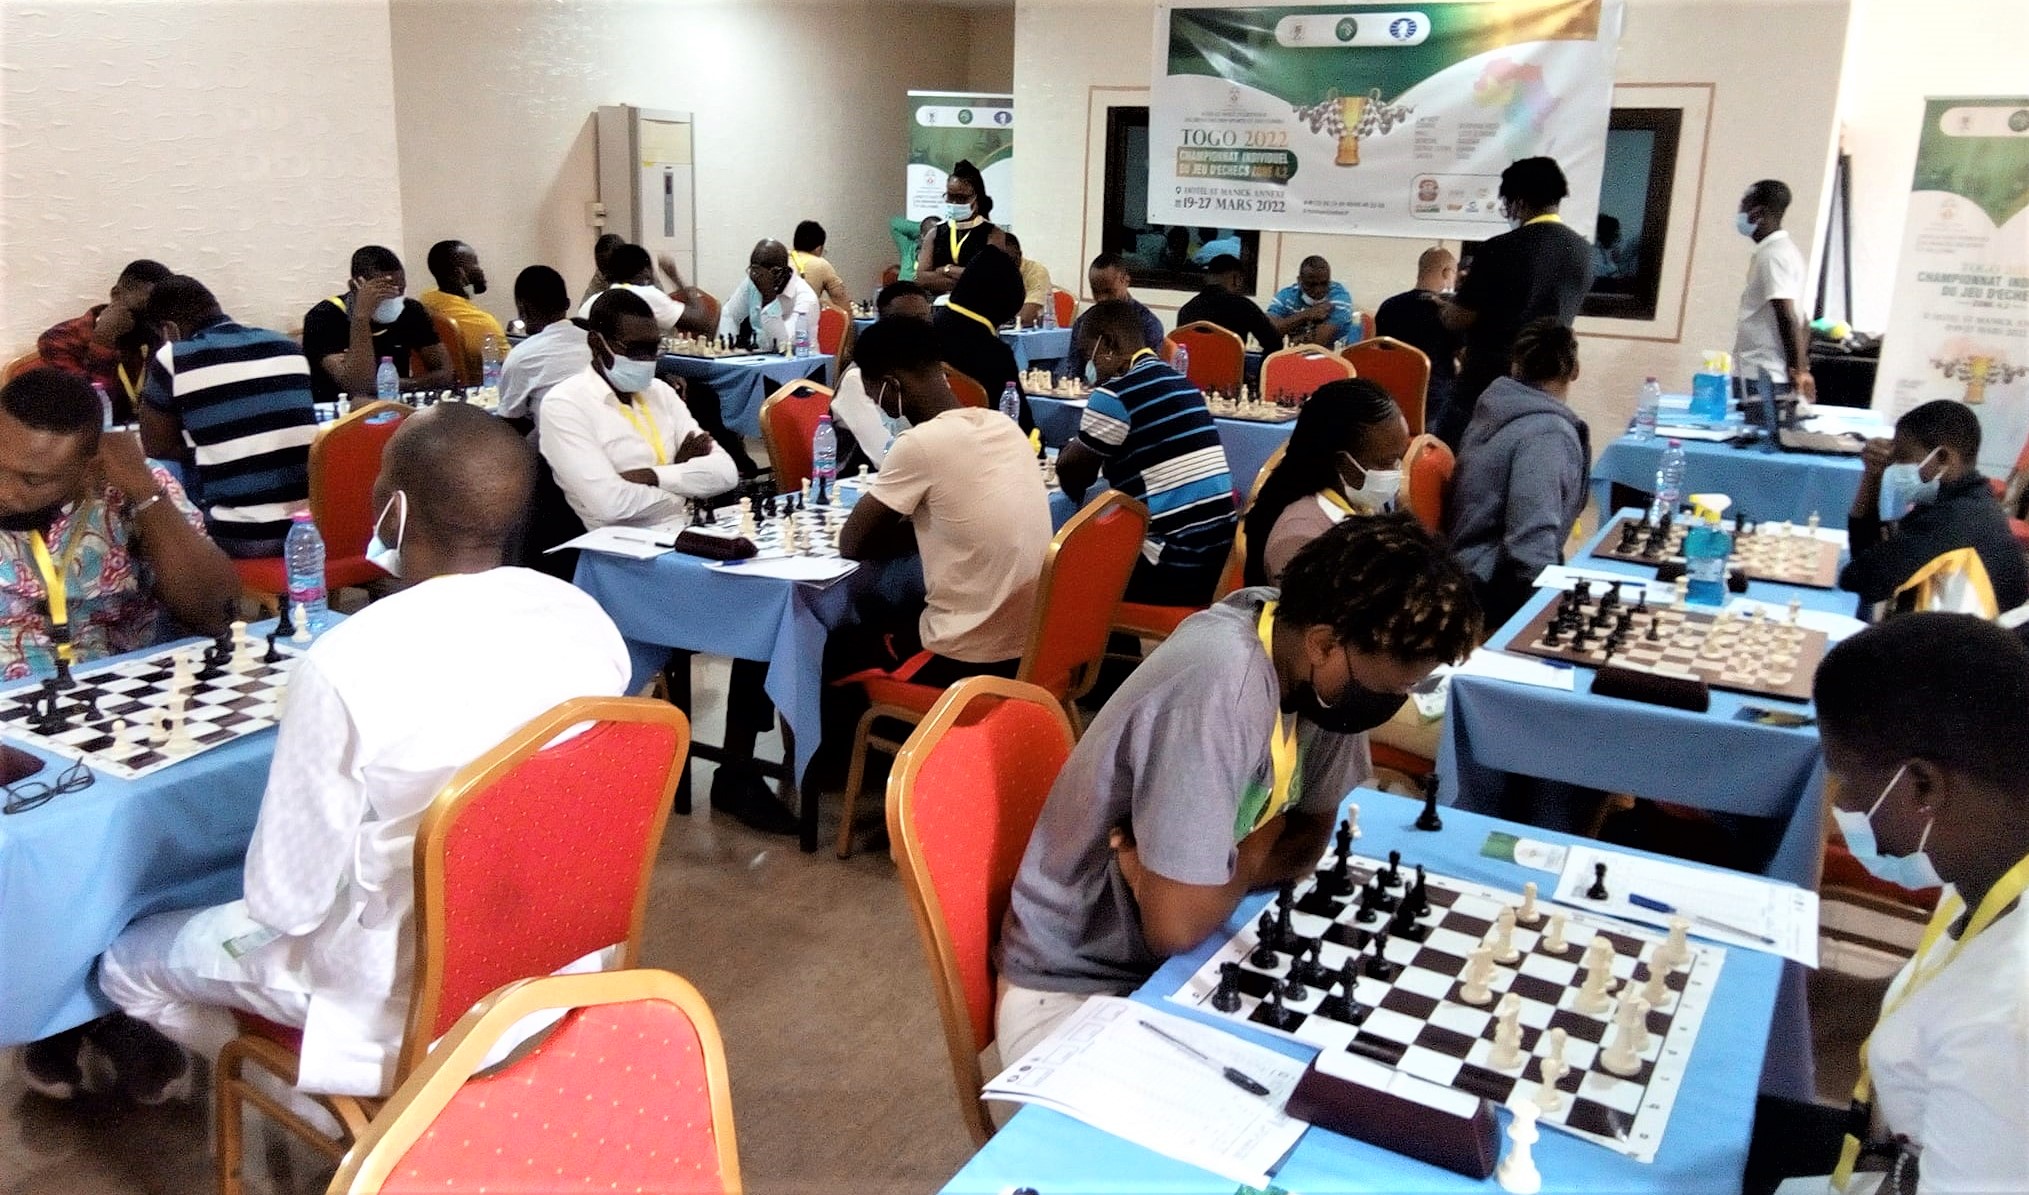 The playing hall of the 2022 Zone 4.2 Chess Championship.